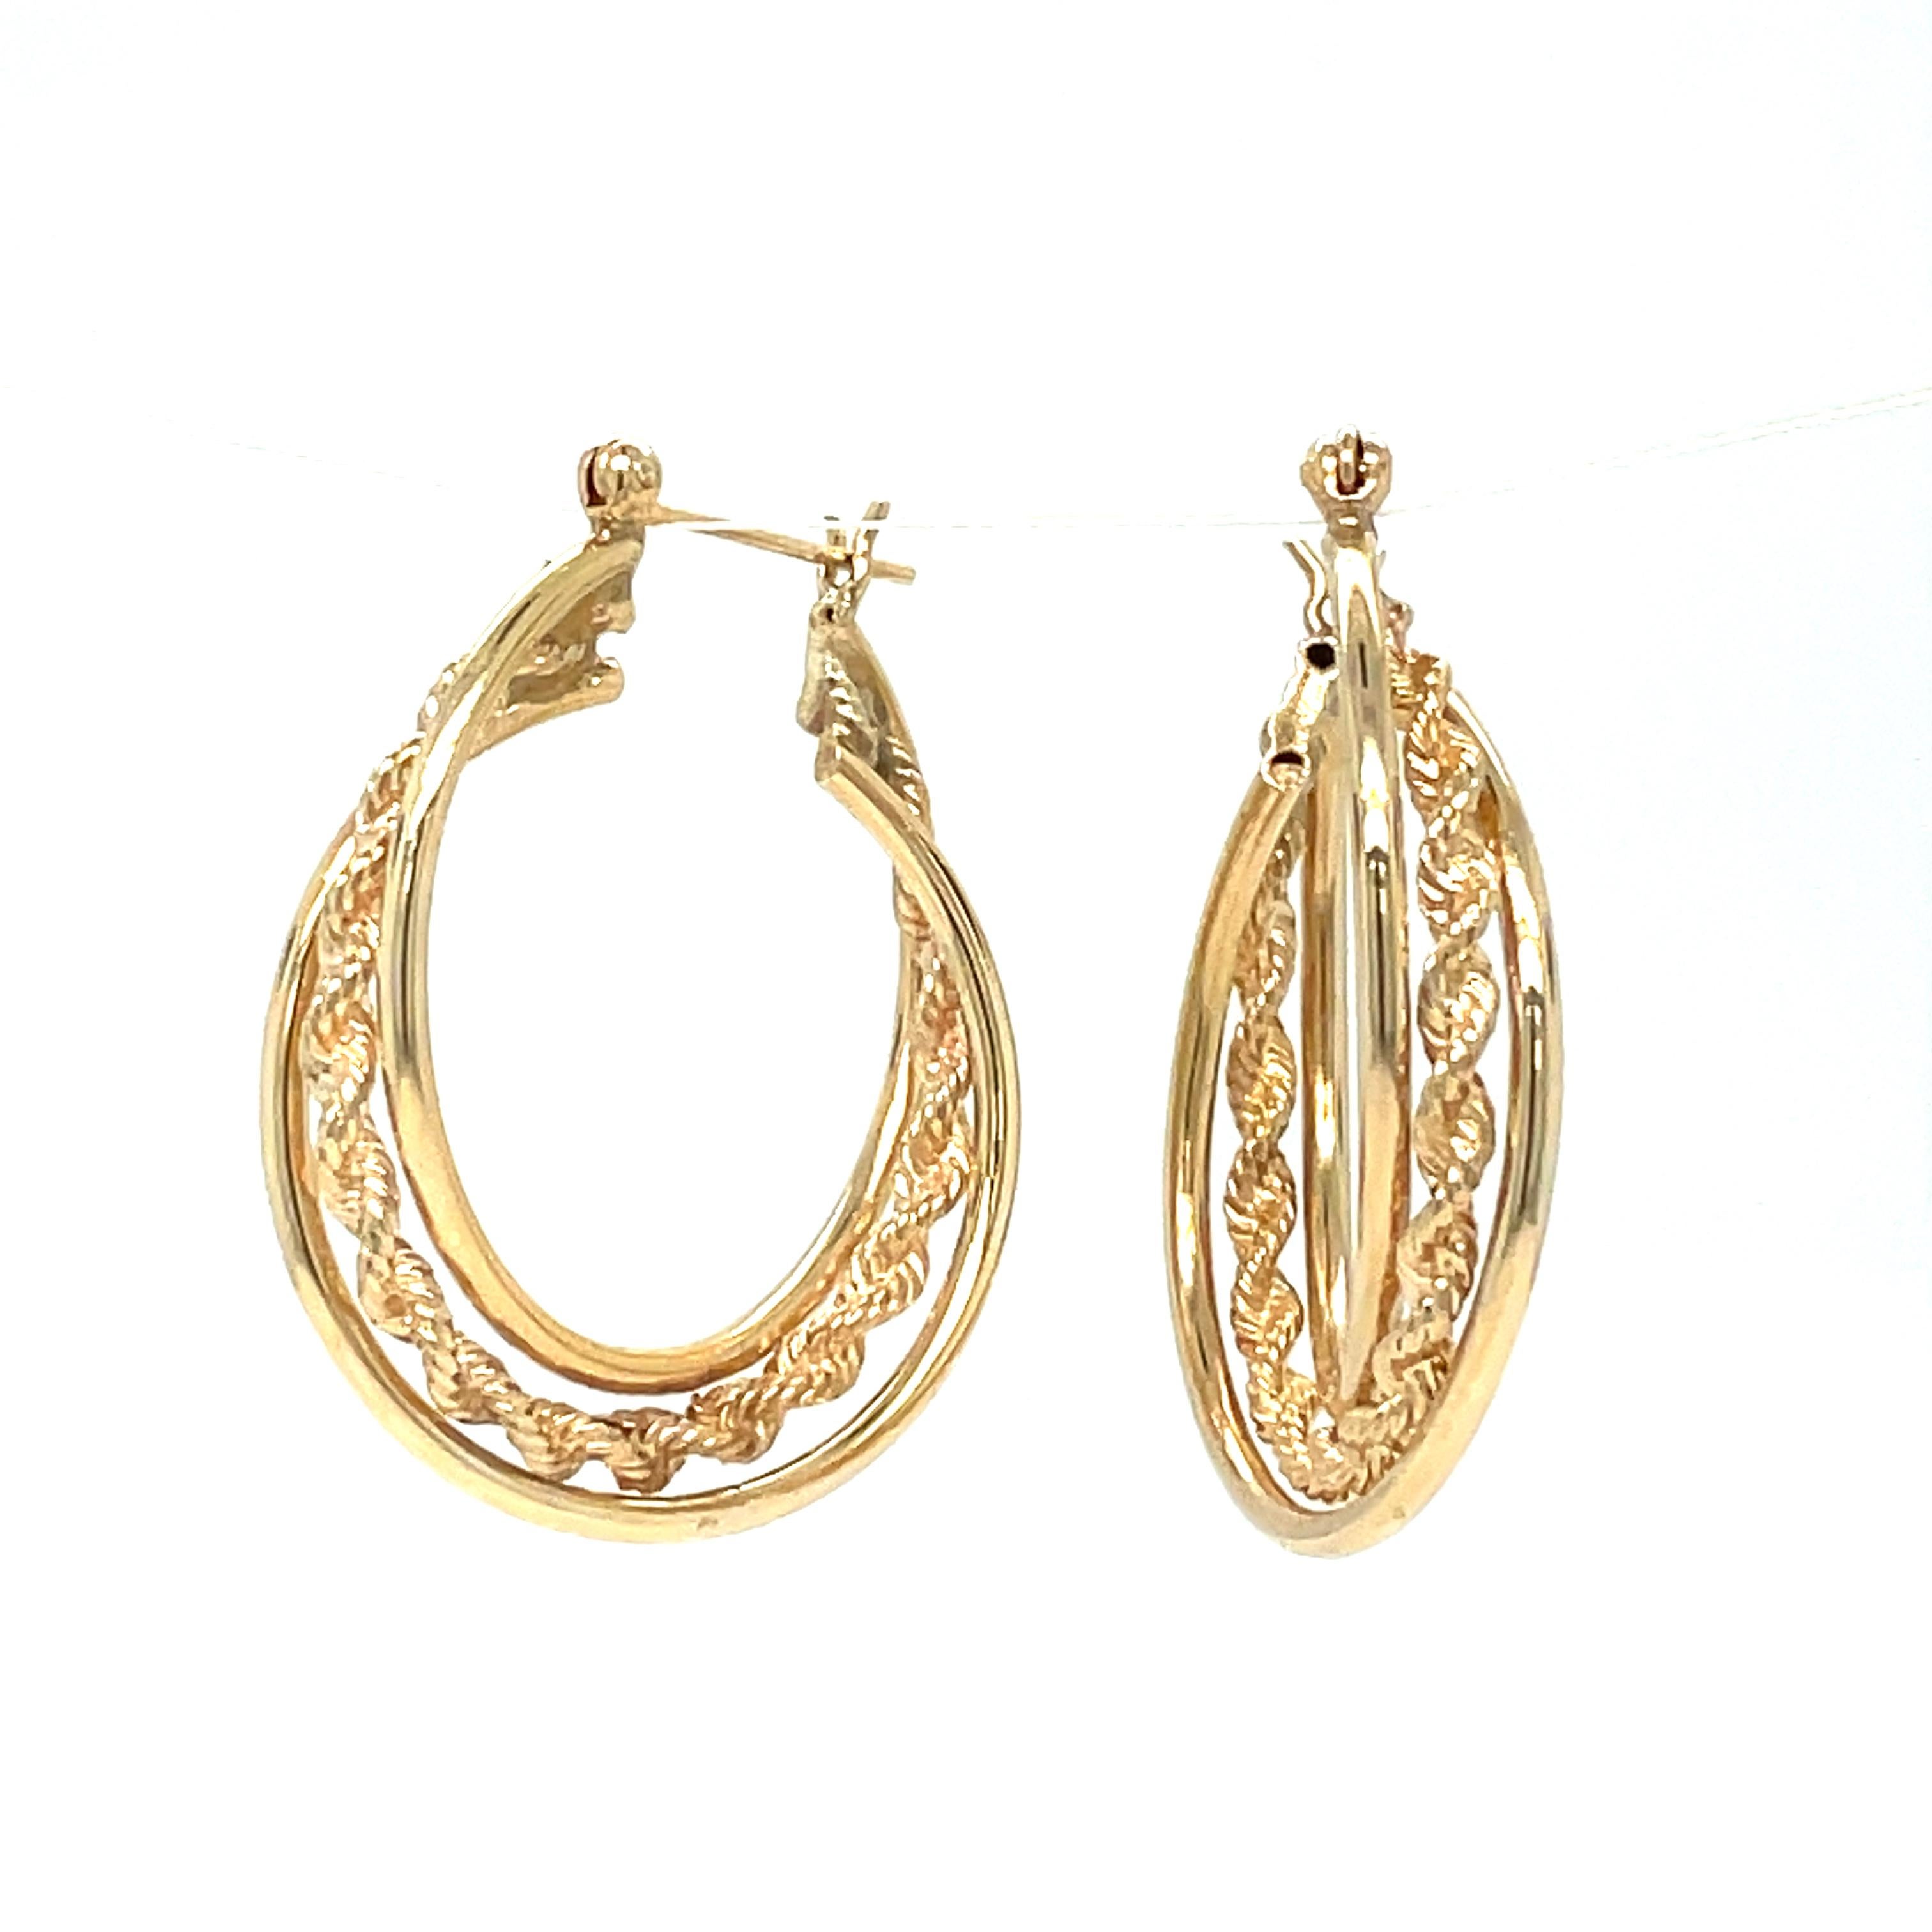 Make a bold statement with these triple hoop earrings crafted from 14k yellow gold. The sleek smooth design of the larger hoop creates a unique contrast with the rope twist of the two smaller hoops. A perfect accessory to add a touch of class to any